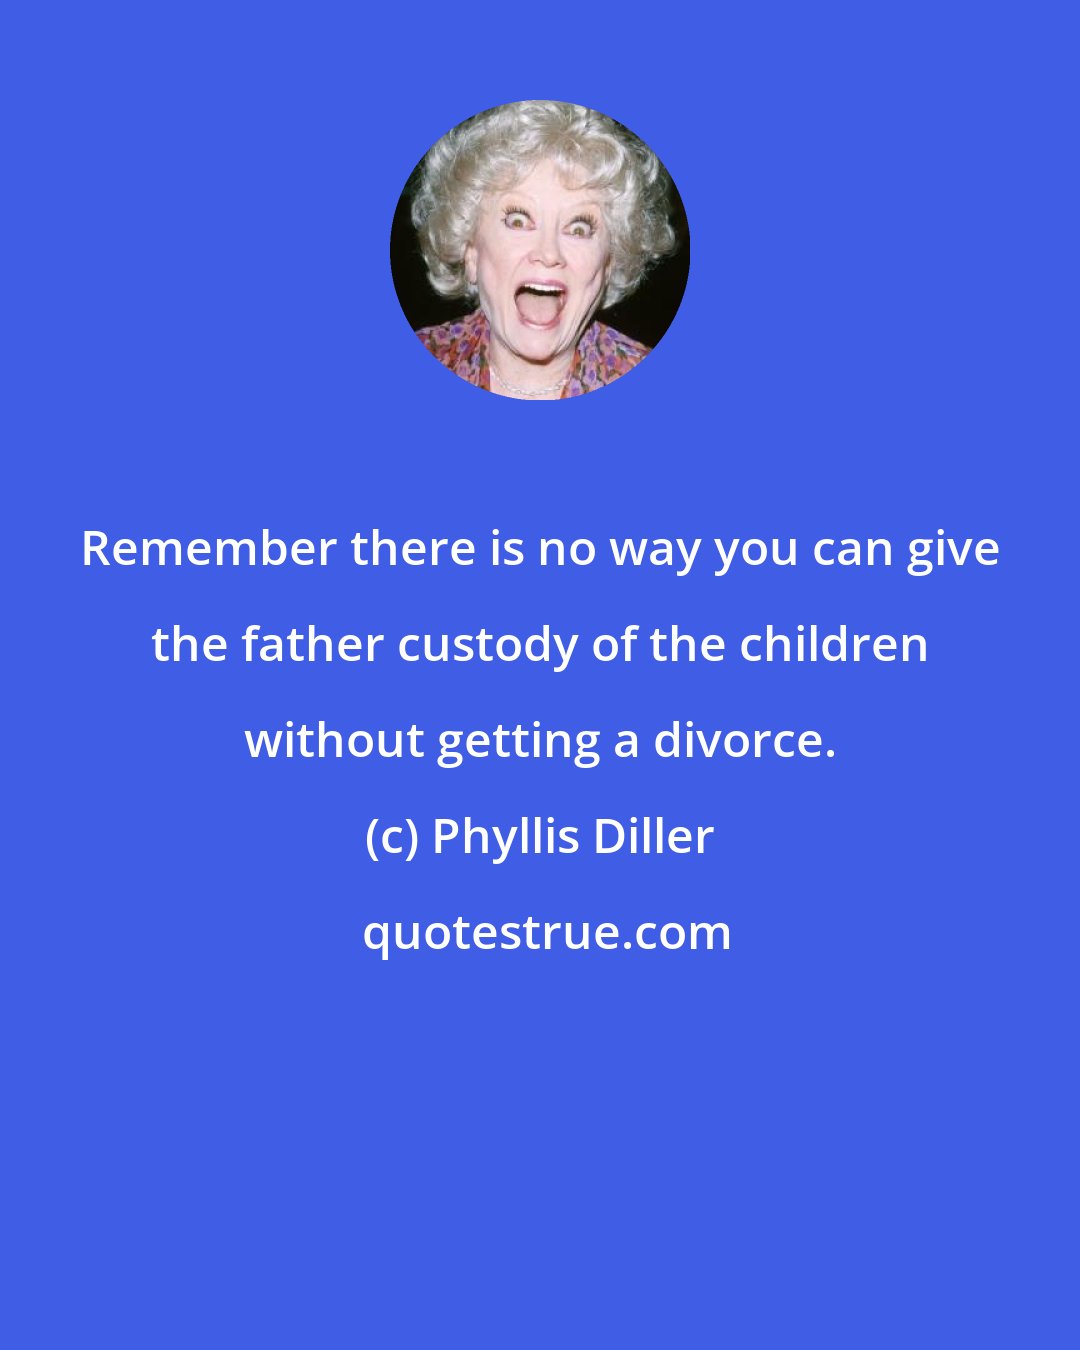 Phyllis Diller: Remember there is no way you can give the father custody of the children without getting a divorce.